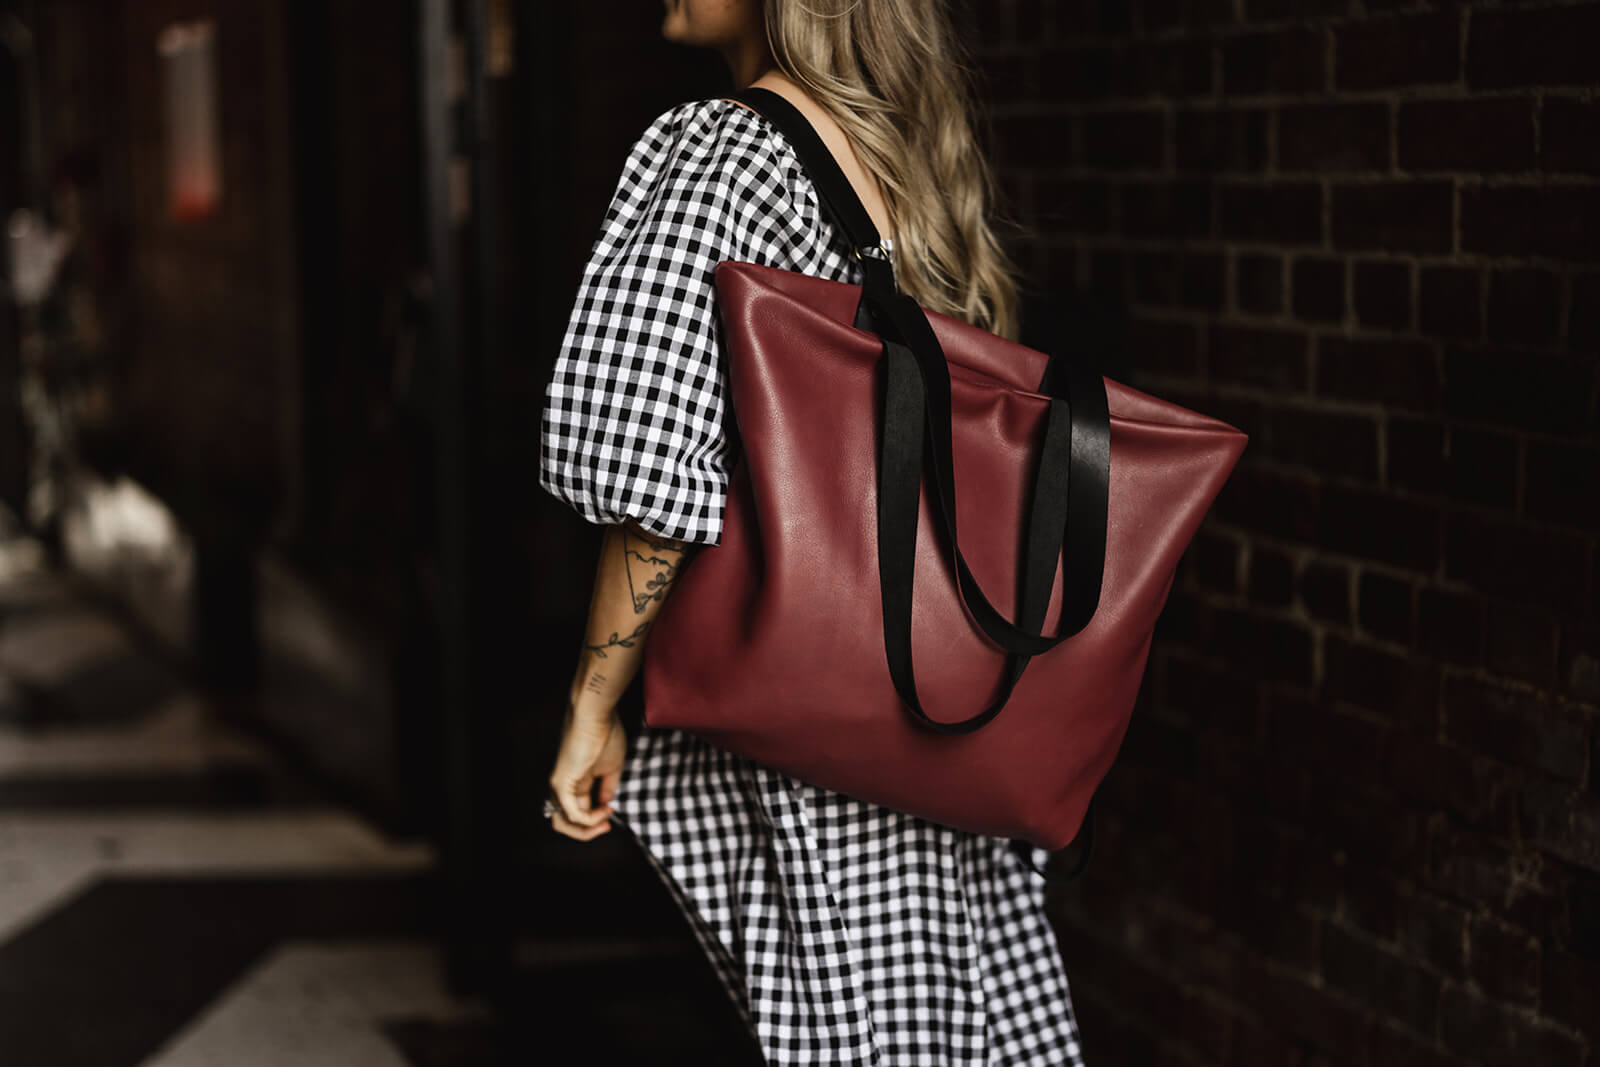 Woman in black and white gingham dress wearing a cherry leather backpack with black straps on one shoulder. The backpack is the Cherry Leather Backpack & Tote by Ella Jackson